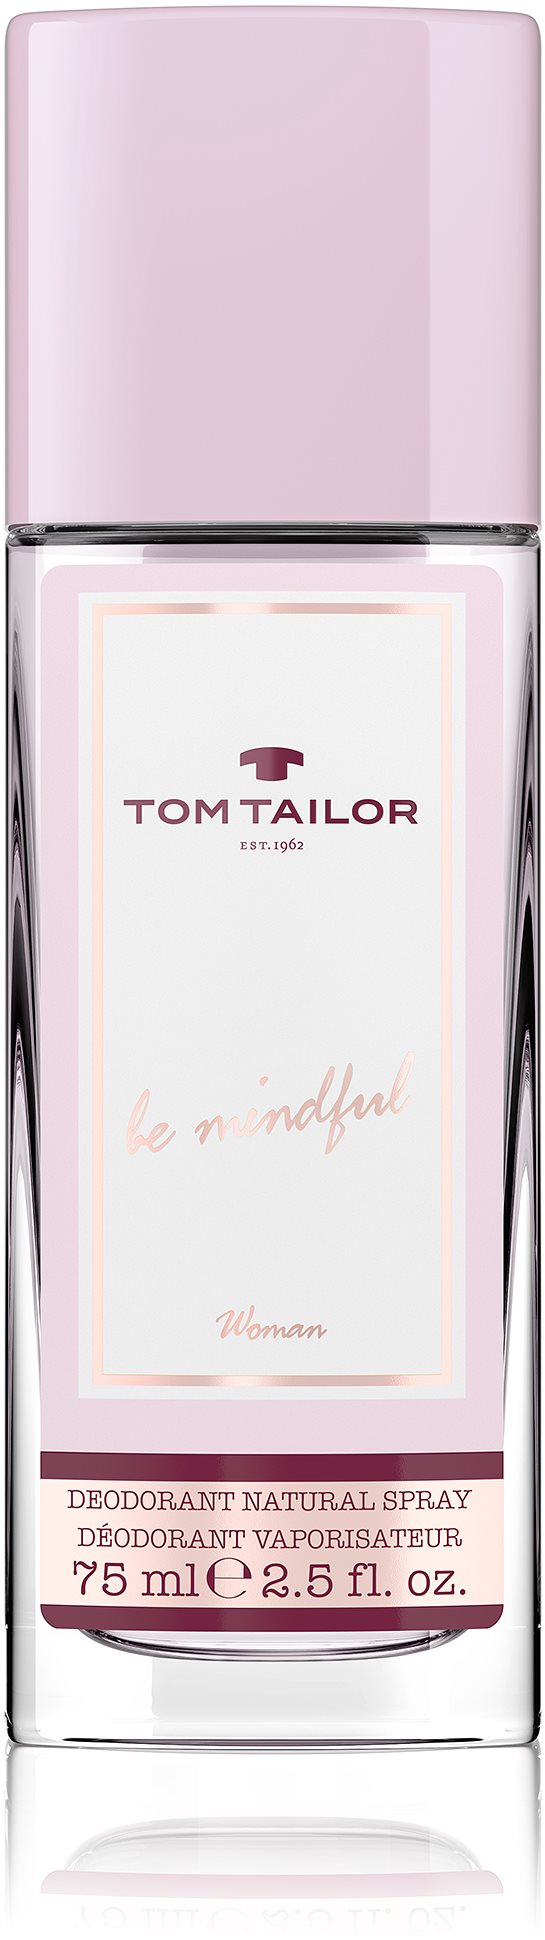 Dezodor TOM TAILOR Be Mindful Woman 75 ml